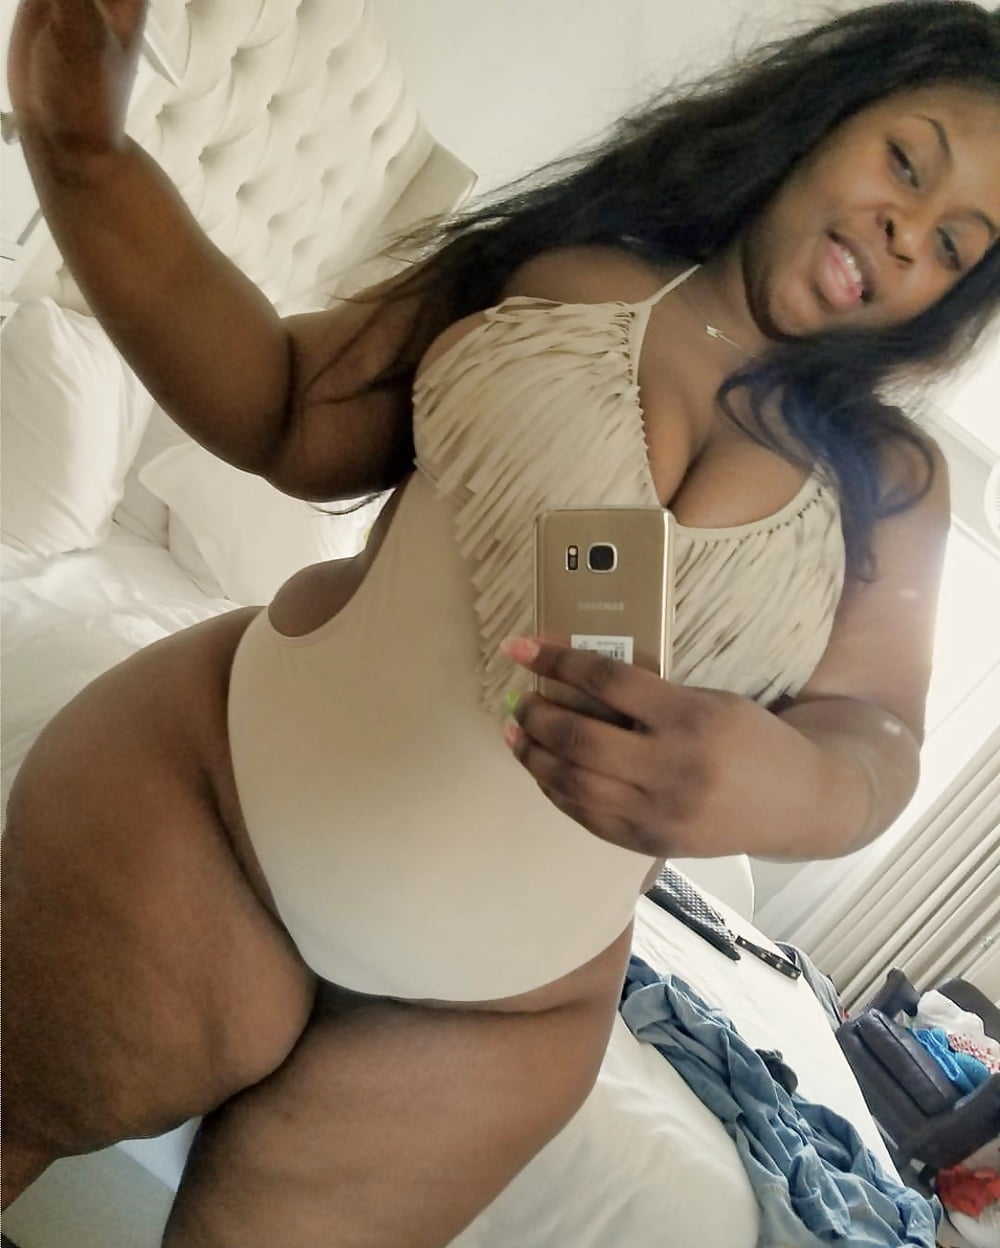 Super thick bbw donkey ass and pear thighs pt 1